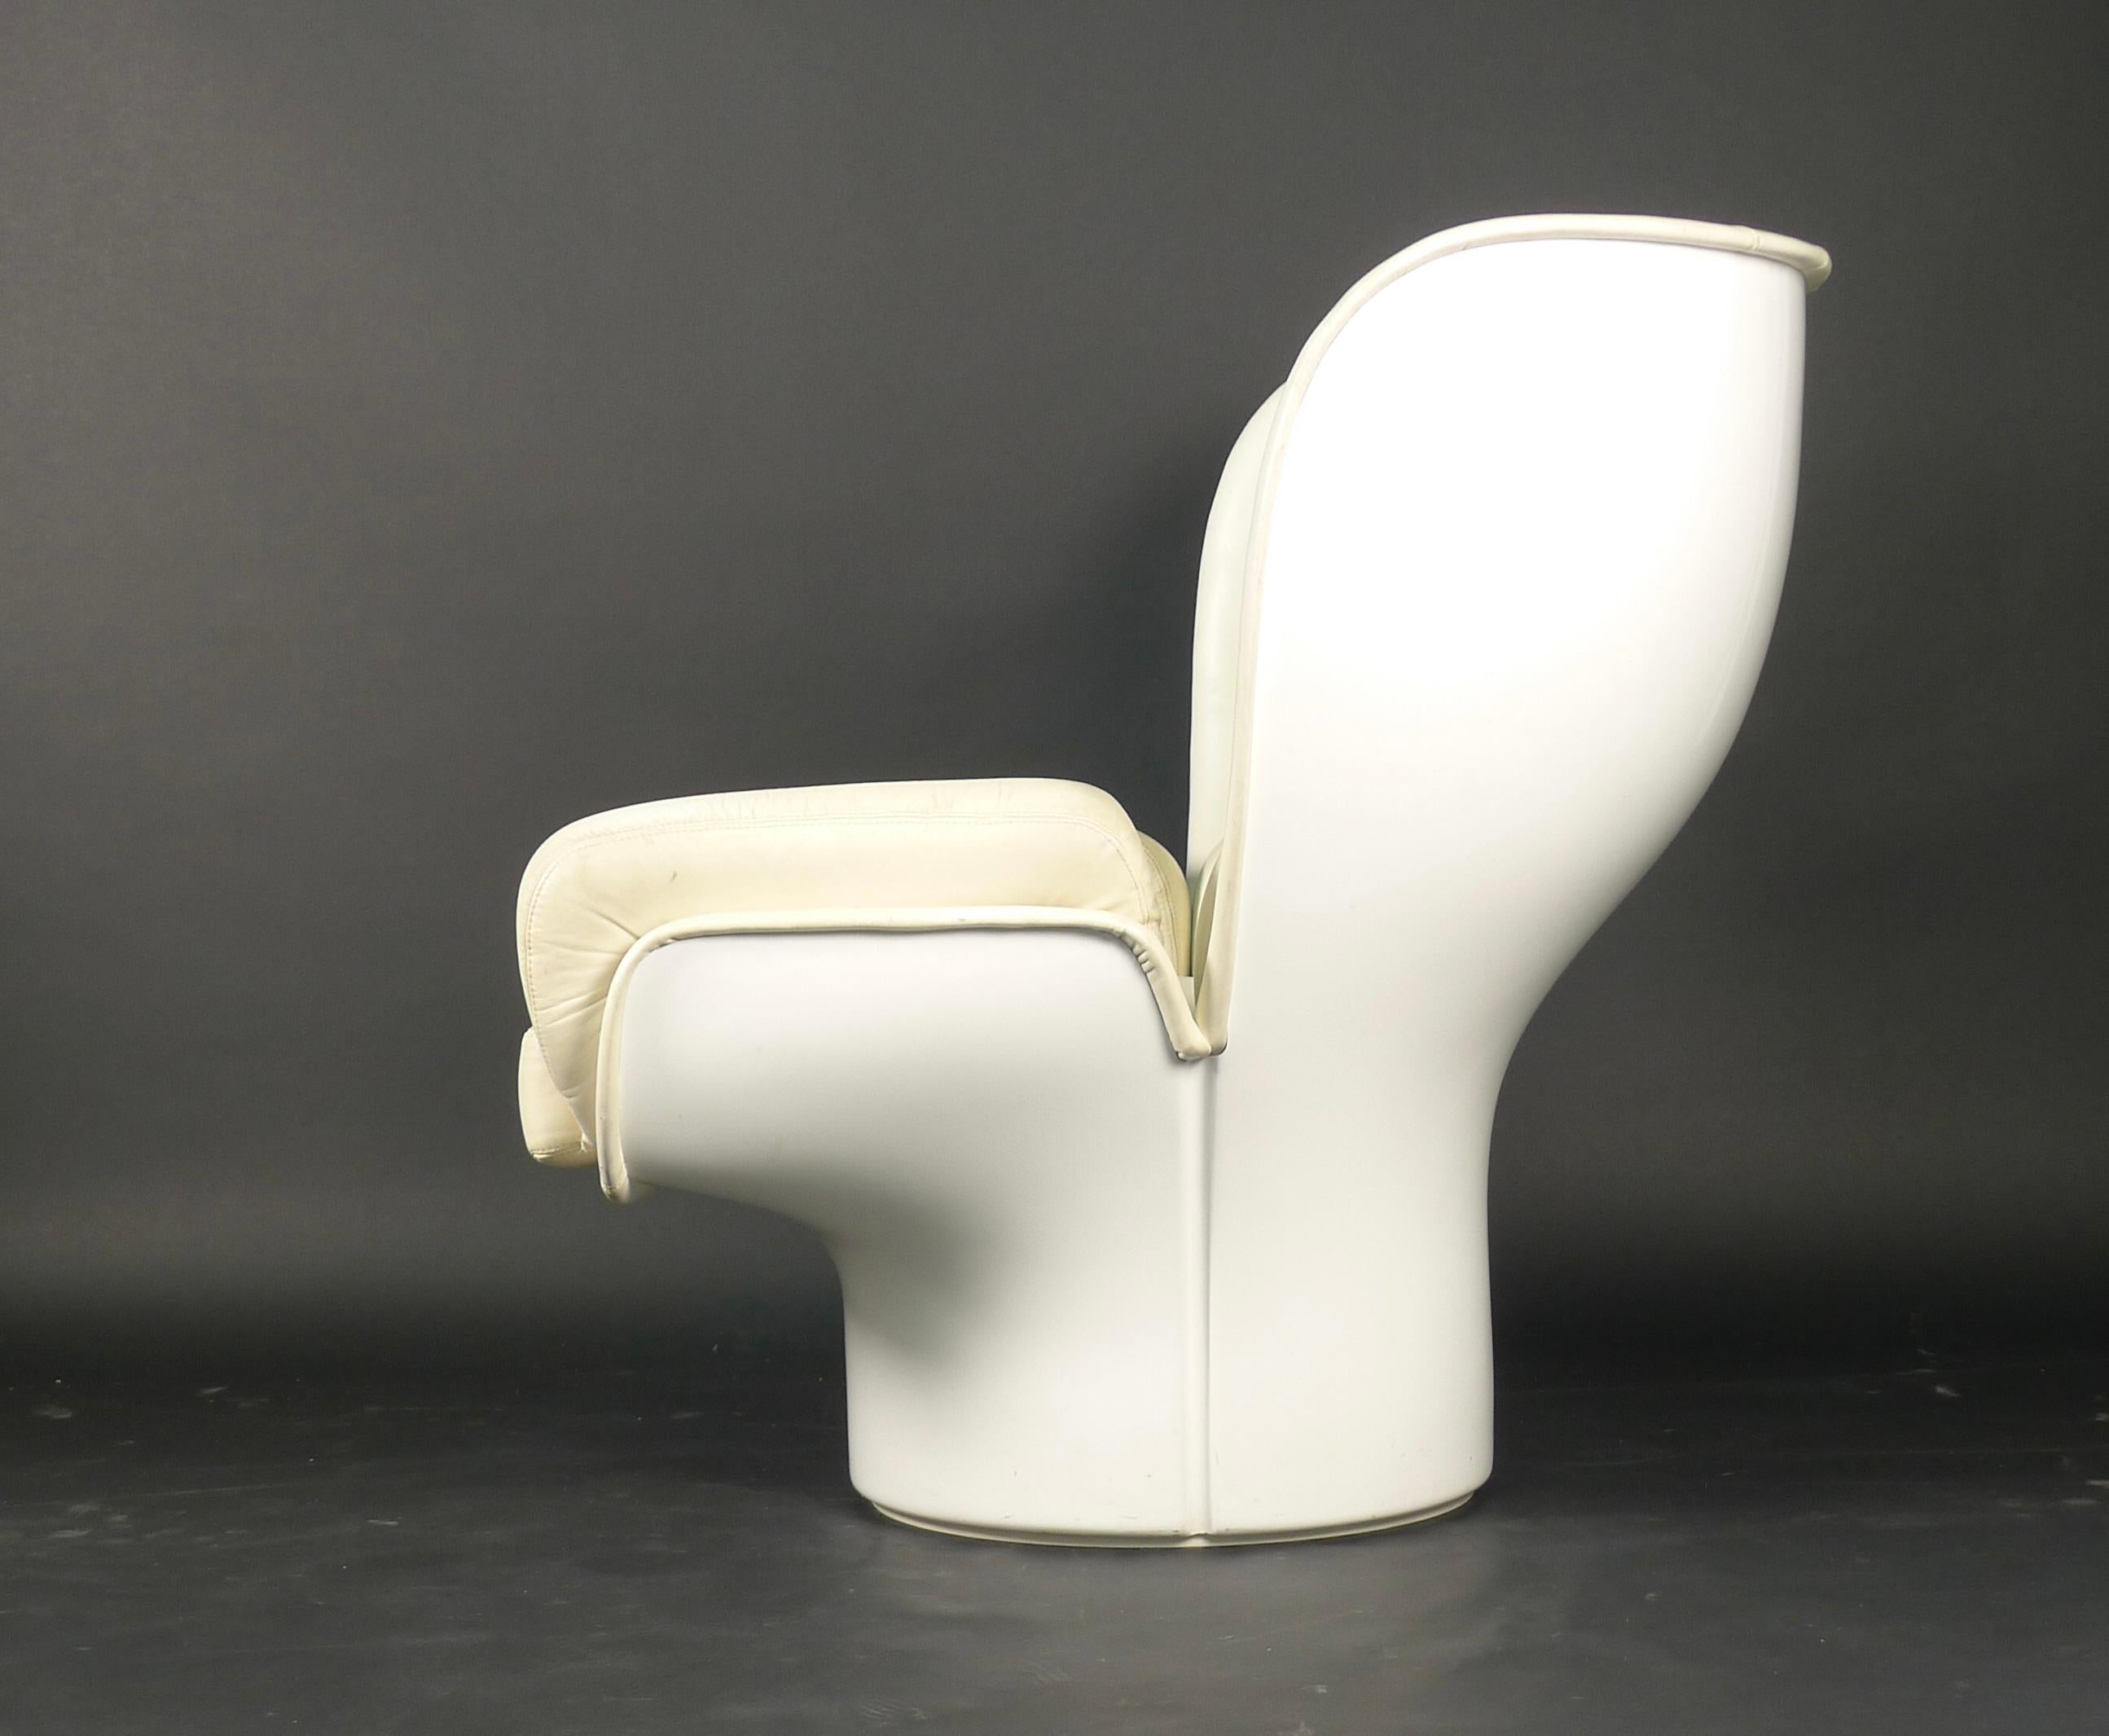 Mid-20th Century Joe Colombo 'Elda' Lounge Chair, White Leather and Fibreglass, by Comfort, Italy